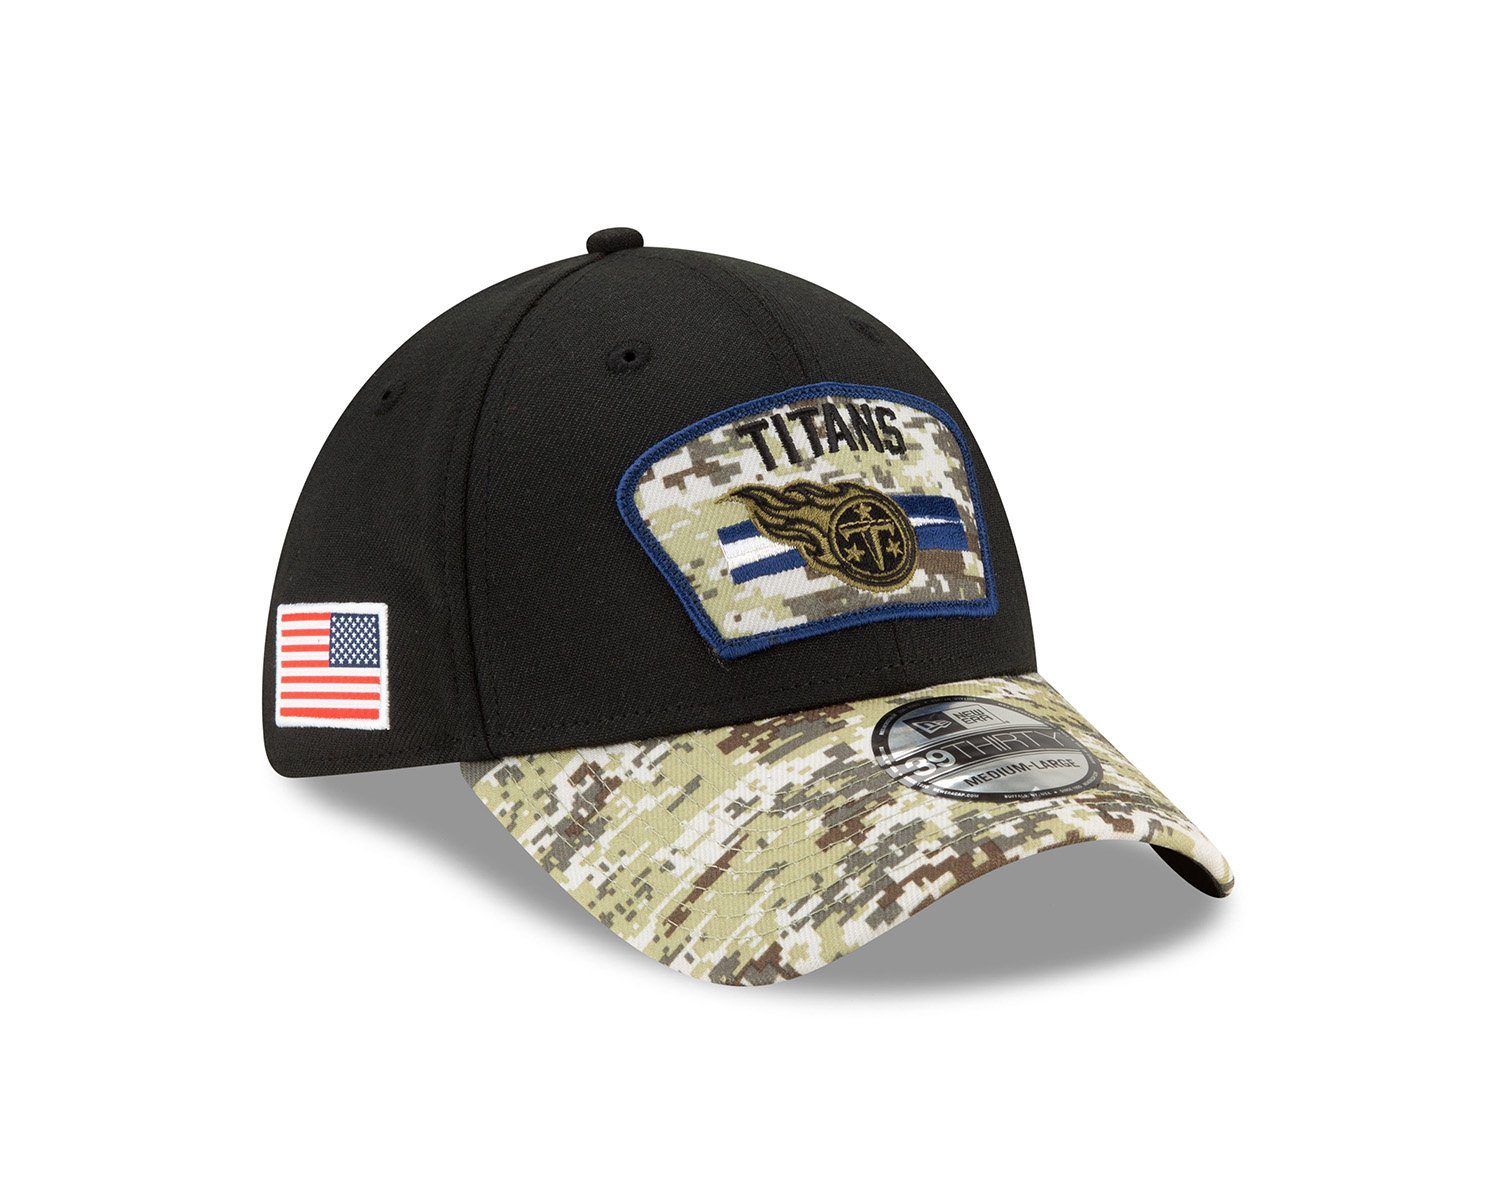 Titans Fitted STS Tennesse New Era 3930 39THIRTY Cap Cap